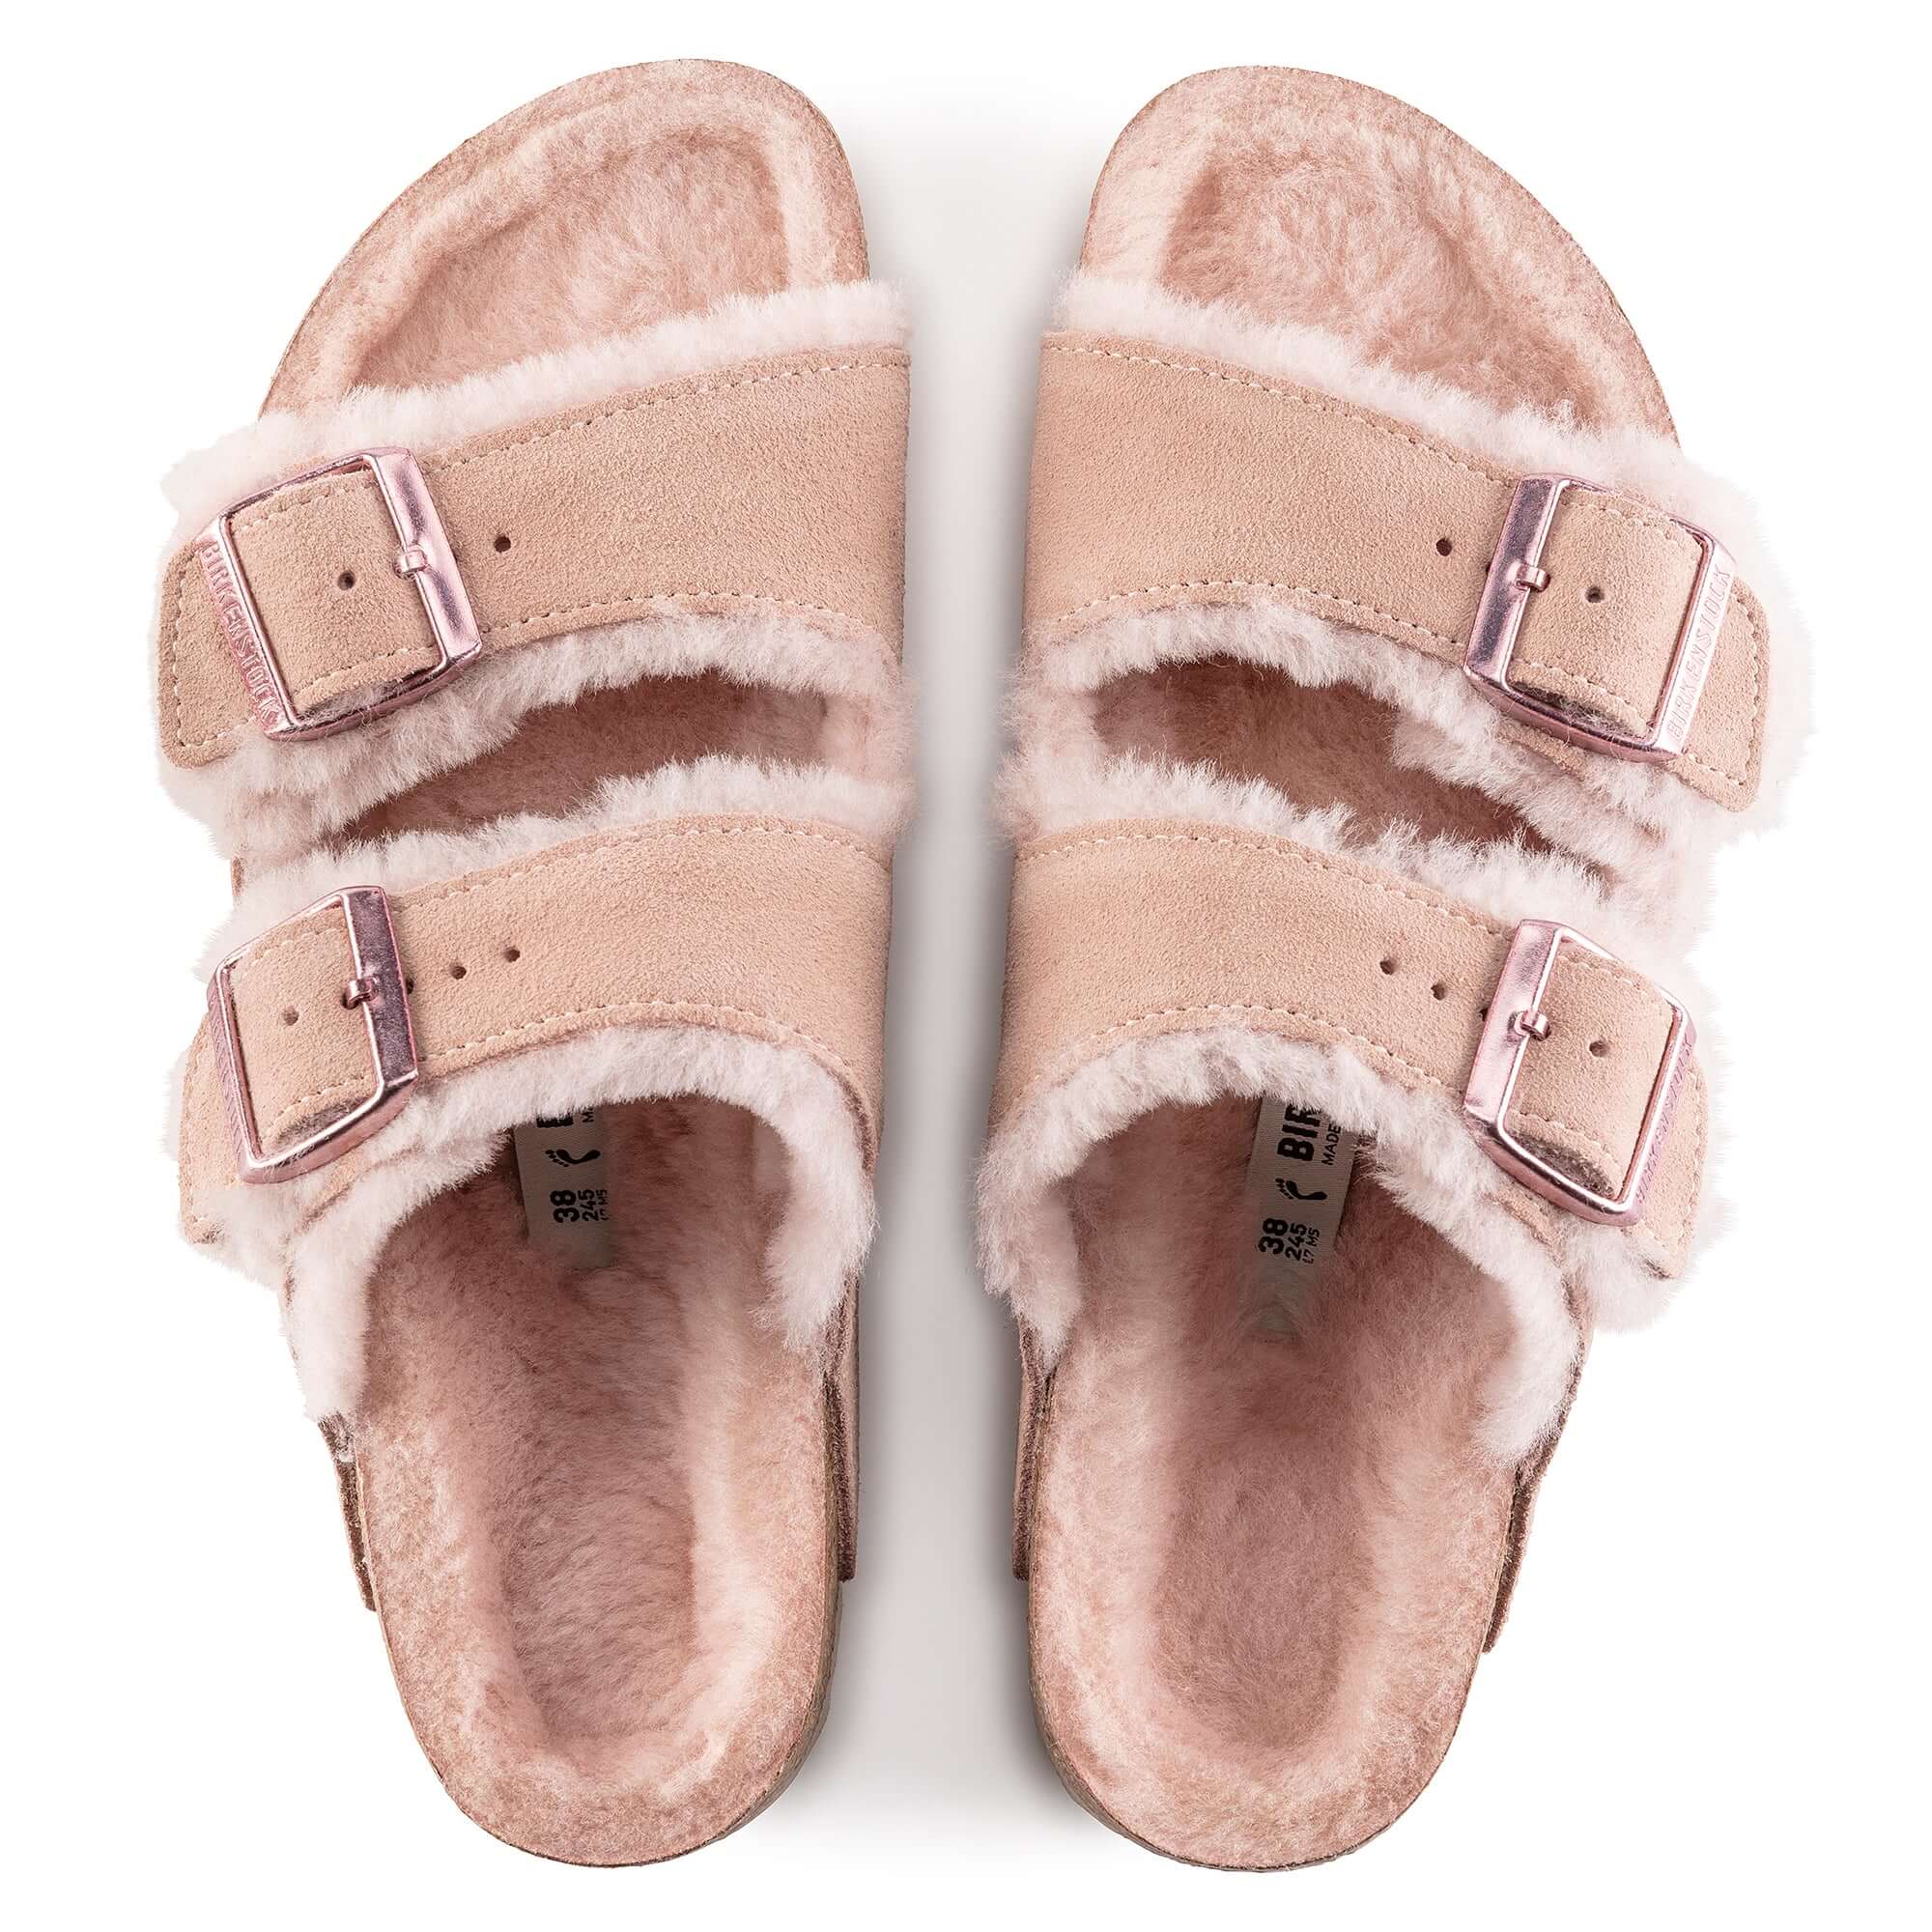 Top view of pink fuzzy sandals with double buckle straps for women.